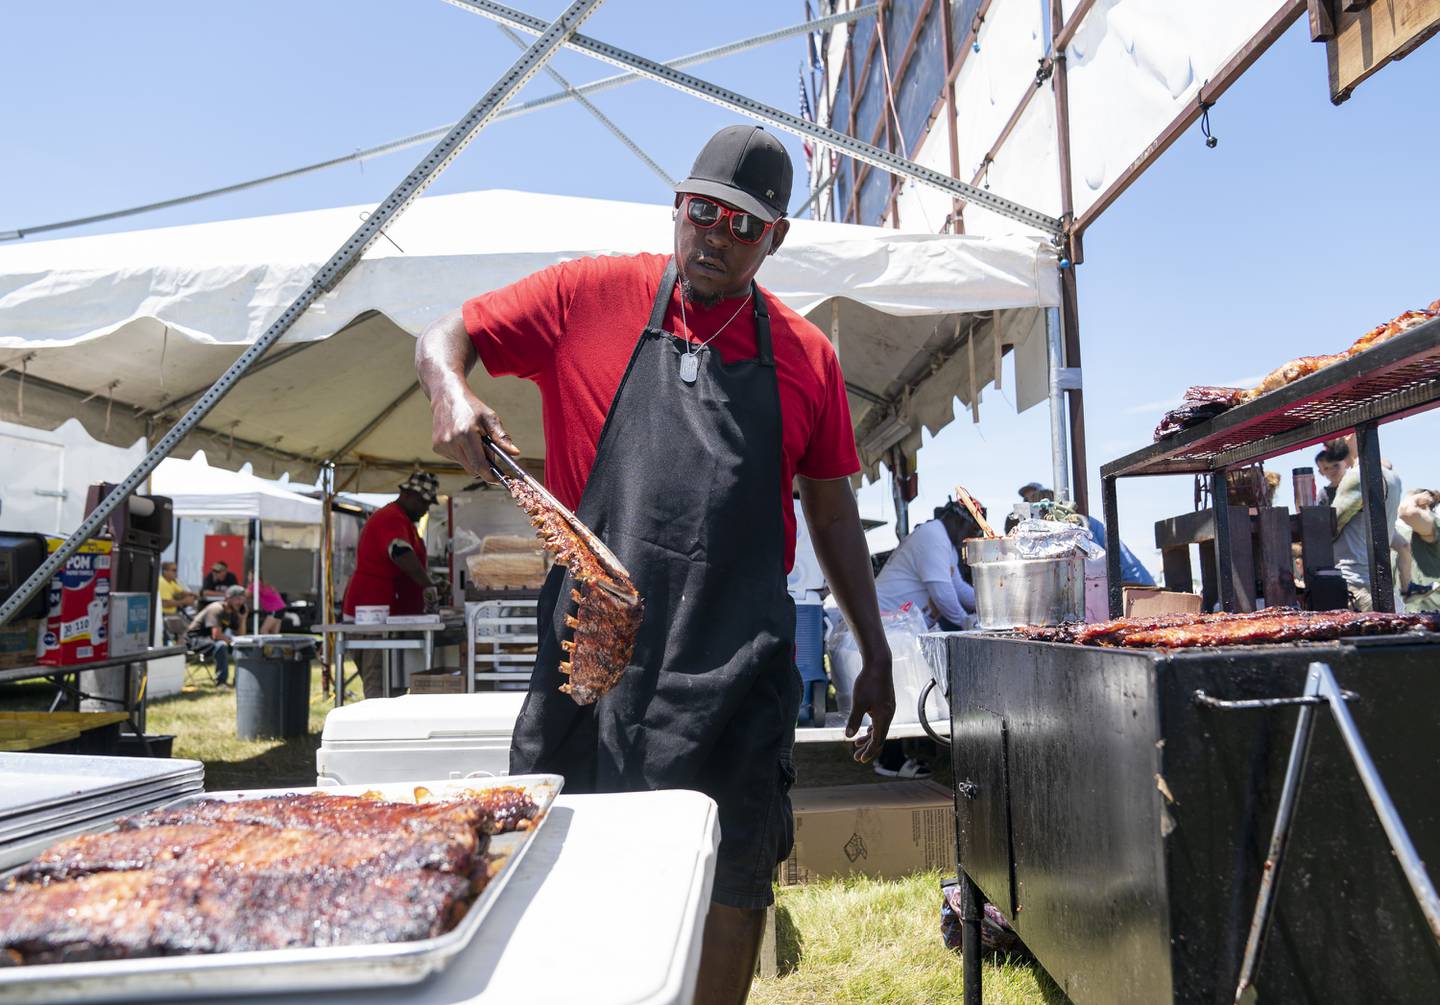 "They call me the grillmaster. My favorite part is cooking ribs and satisfying customers." Says Dee Price, of Cleveland, Ohio, as he works the grill with ribs from Cowboys BBQ & Rib Company of Fort Worth, Texas during the final day of the Lake in the Hills Rotary Rockin' Ribfest on Sunday, July 10, 2022 at Sunset Park in Lake in the Hills. The annual festival featuring award winning BBQ and Rib vendors, carnival and live music, ran from July 7-10.